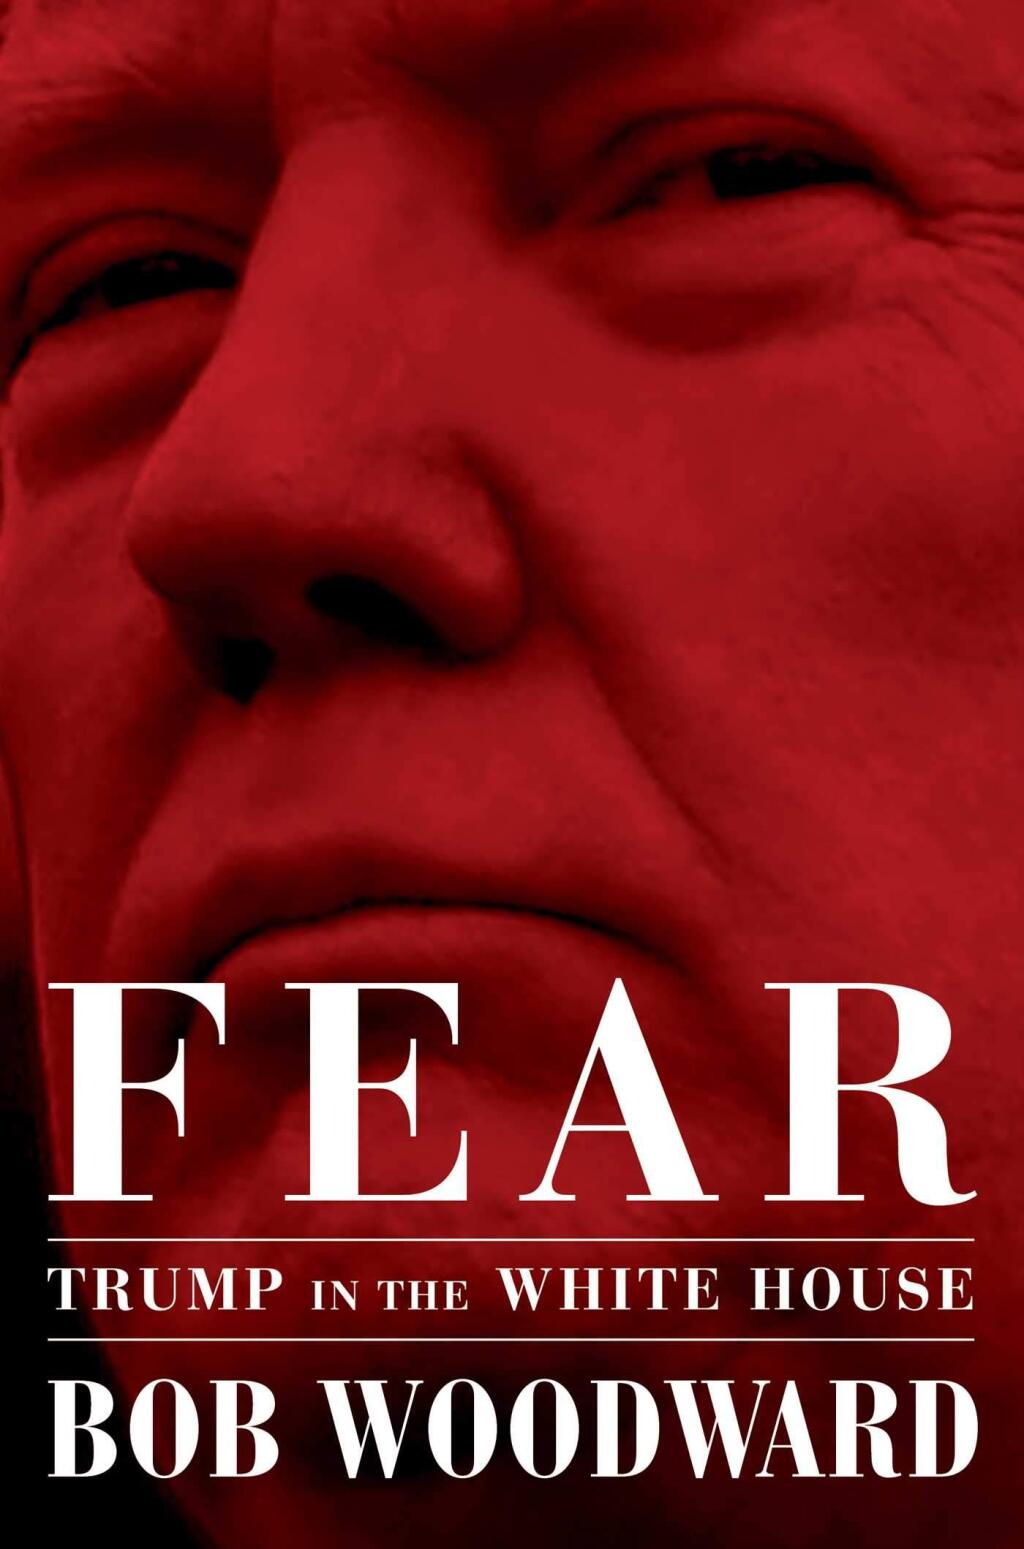 FEAR: Bob Woodward's White House exploration scares itself into the top spot on this week's list of top-selling books in Petaluma.